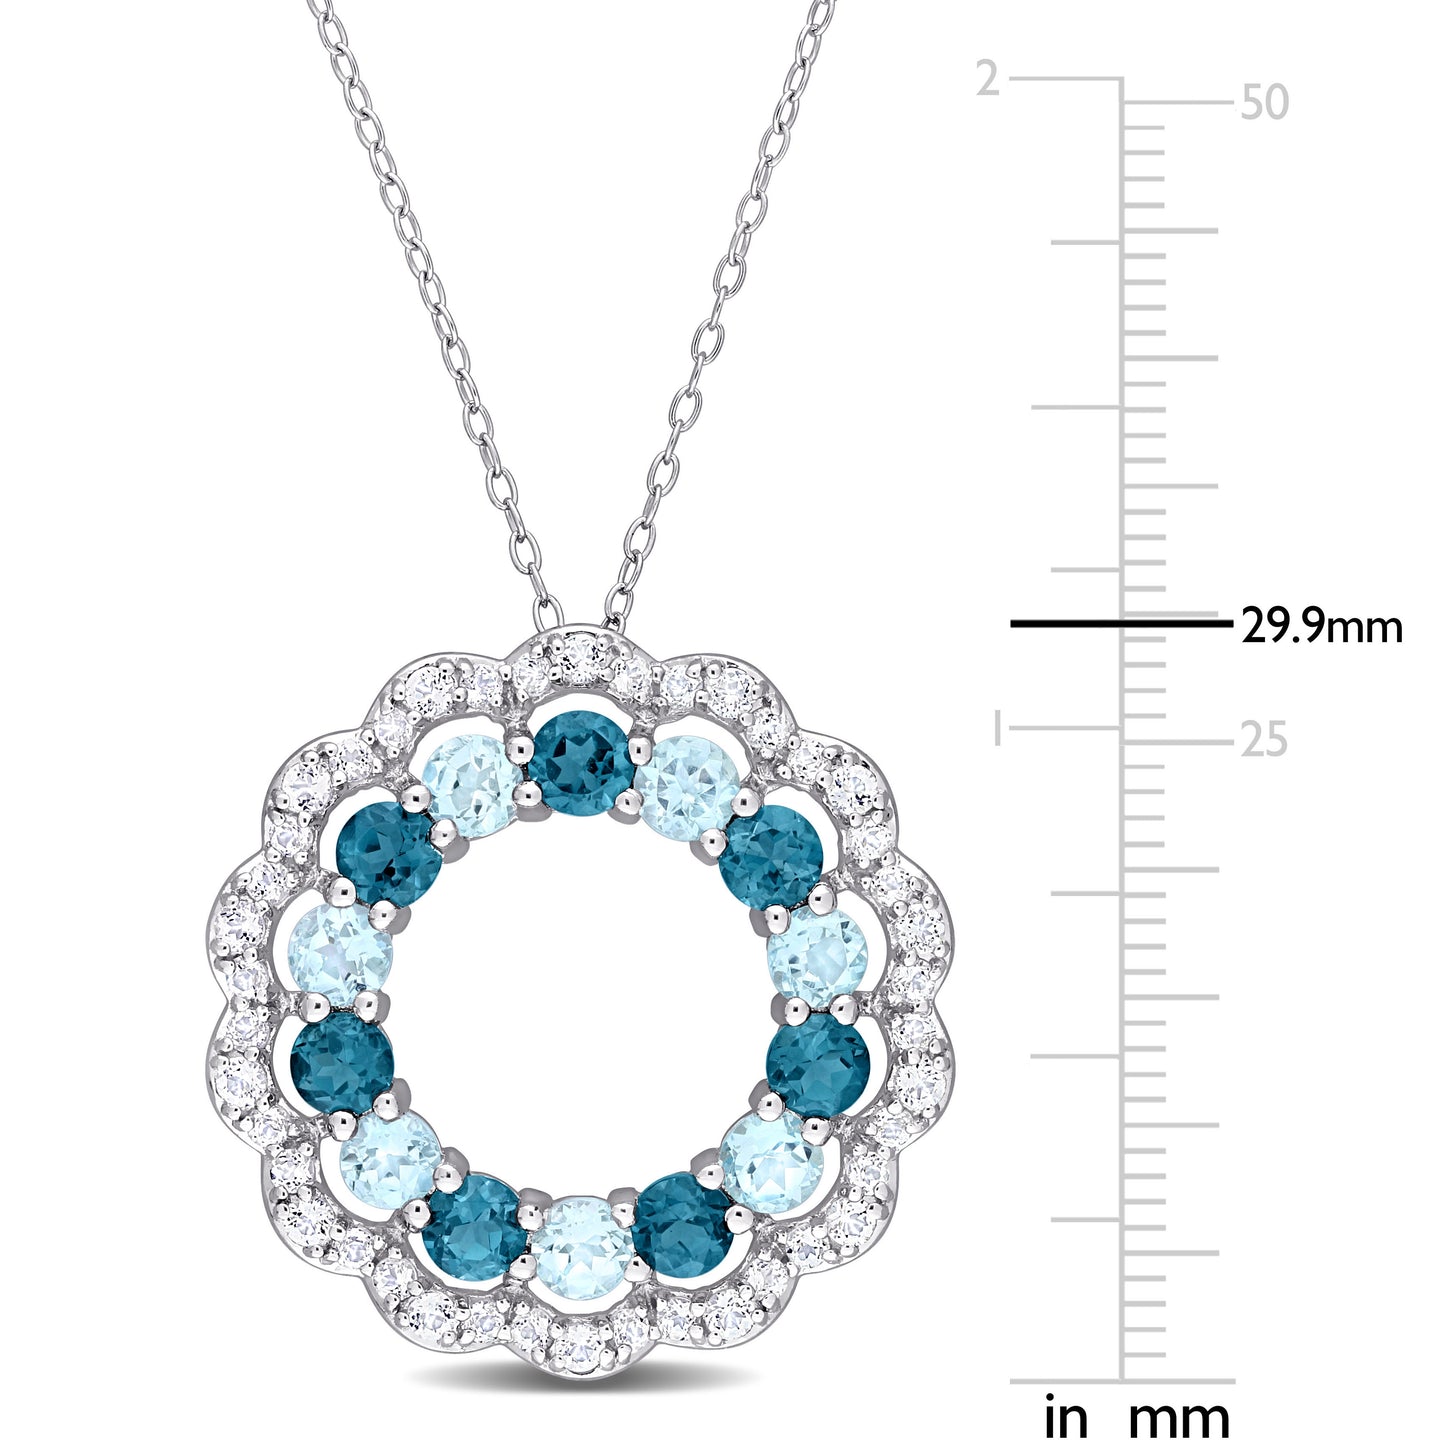 6ct Blue & White Topaz Double Circle Necklace in Sterling Silver